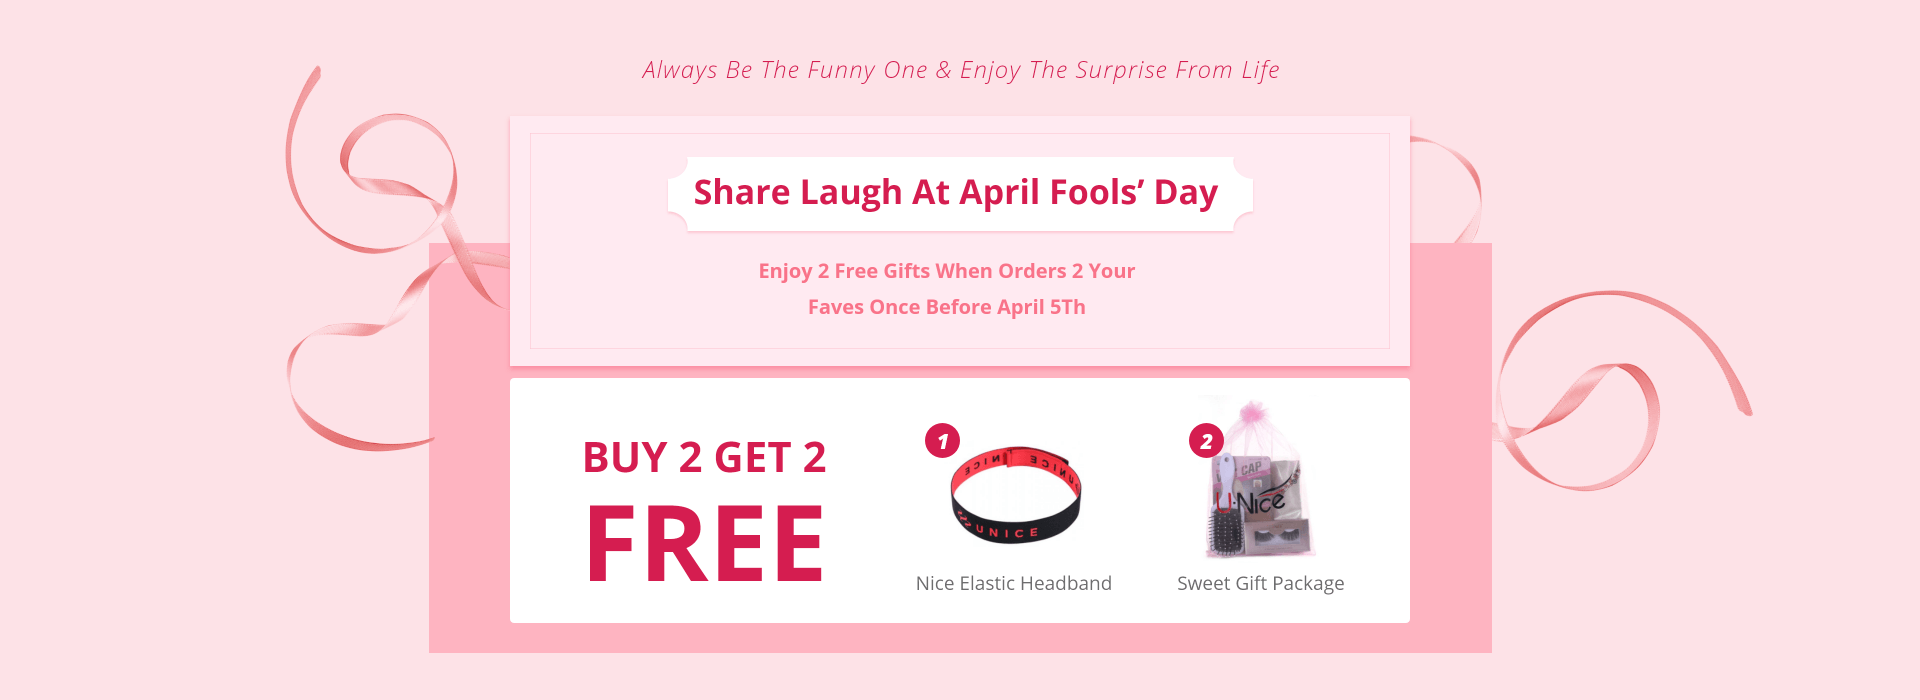 April Fool‘s Day Gifts